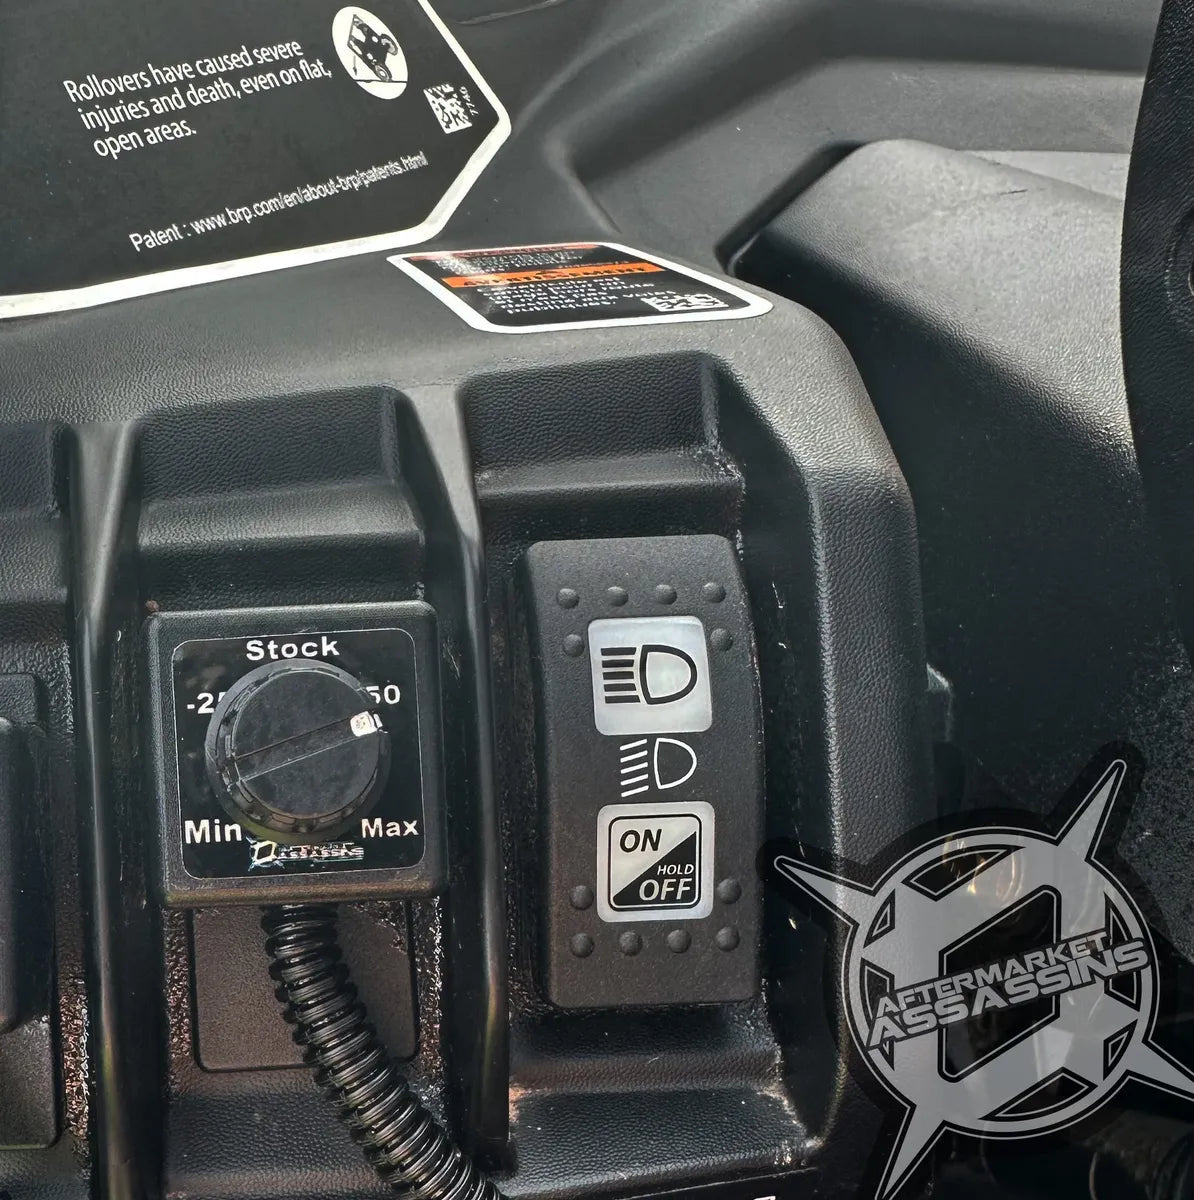 AFTERMARKET ASSASSINS- AA Throttle Control Box for Can Am